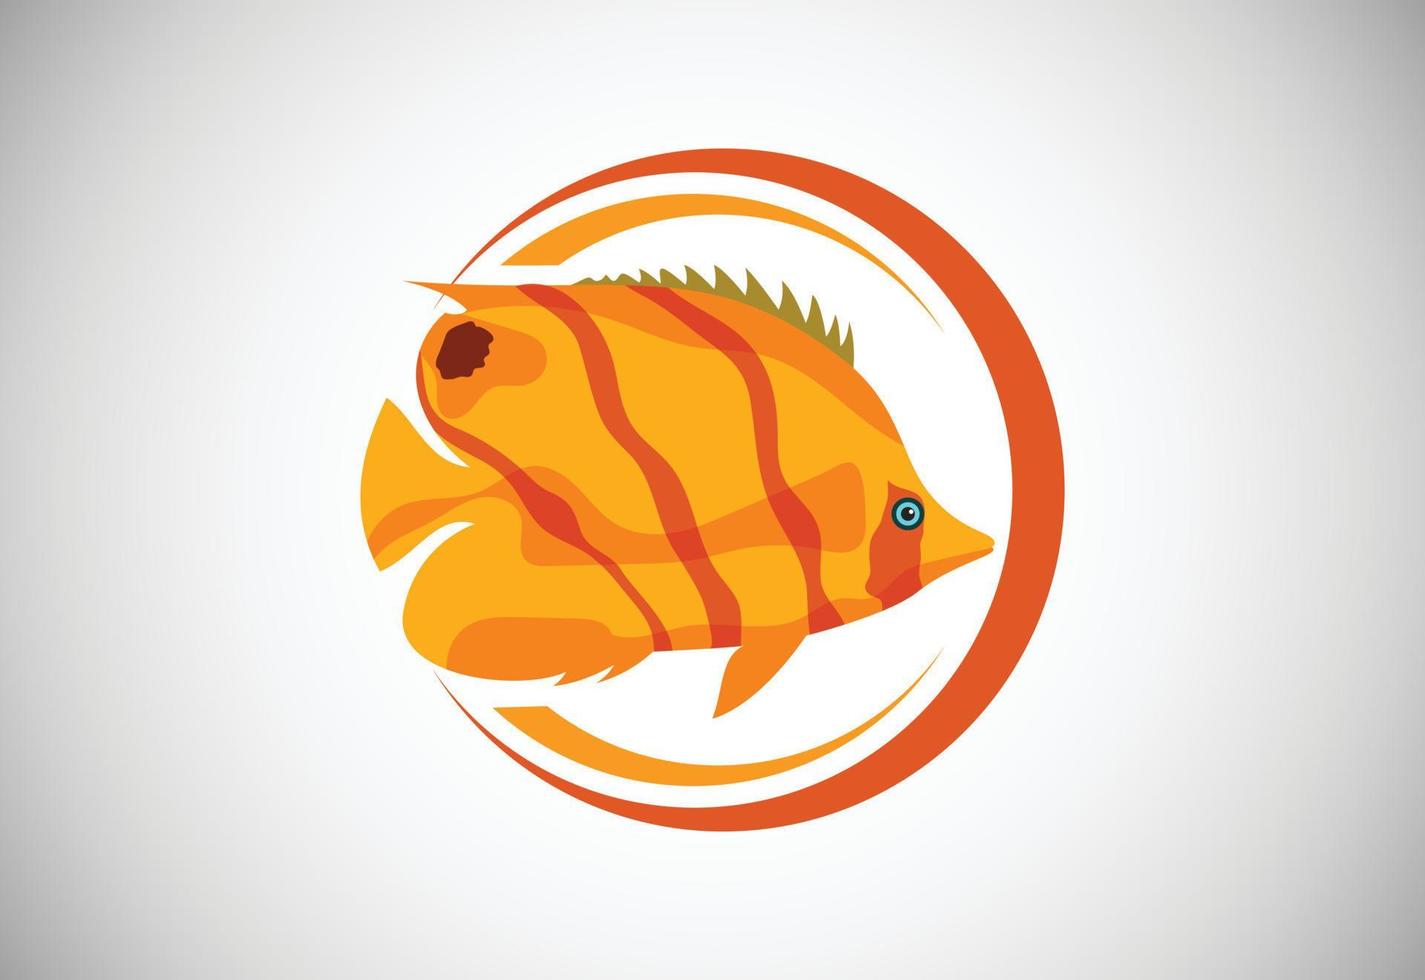 Butterflyfish in a circle. Fish logo design template. Seafood restaurant shop Logotype concept icon. vector